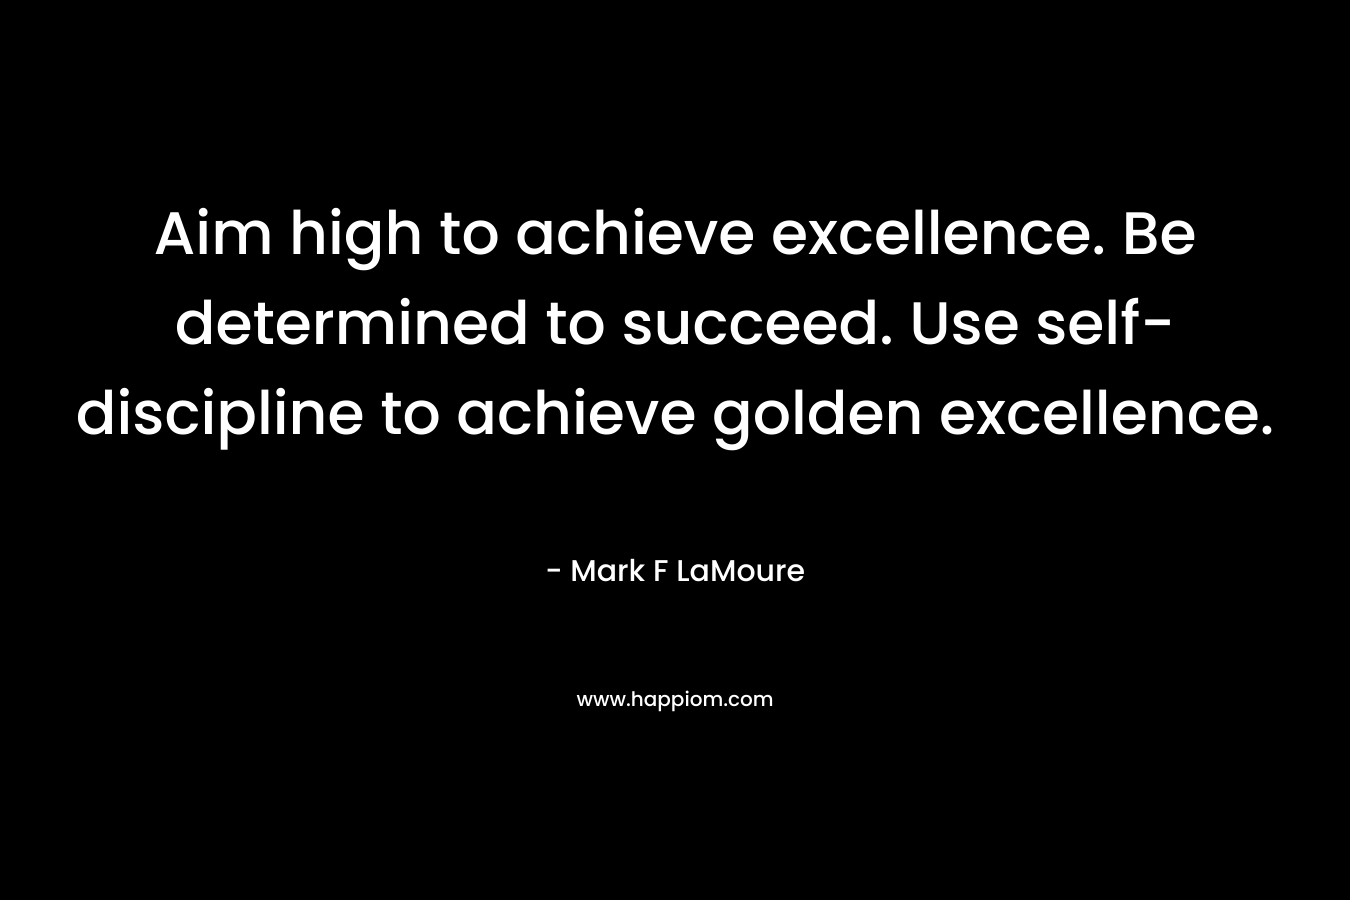 Aim high to achieve excellence. Be determined to succeed. Use self-discipline to achieve golden excellence.